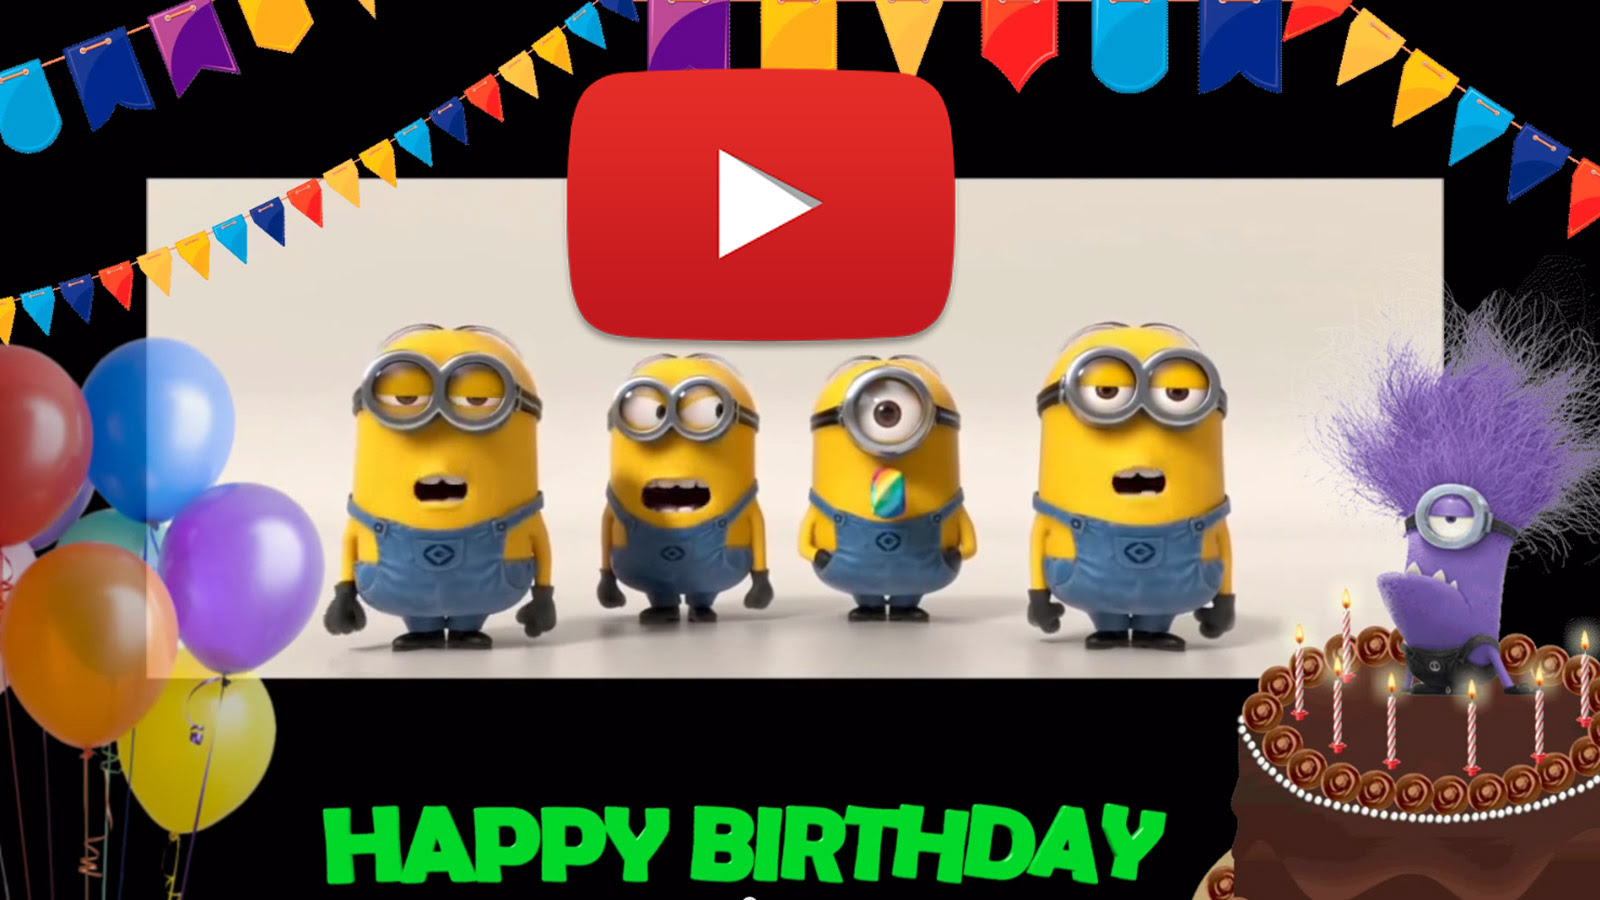 Happy birthday song minions gonrat you friends with birthday. Link an ...